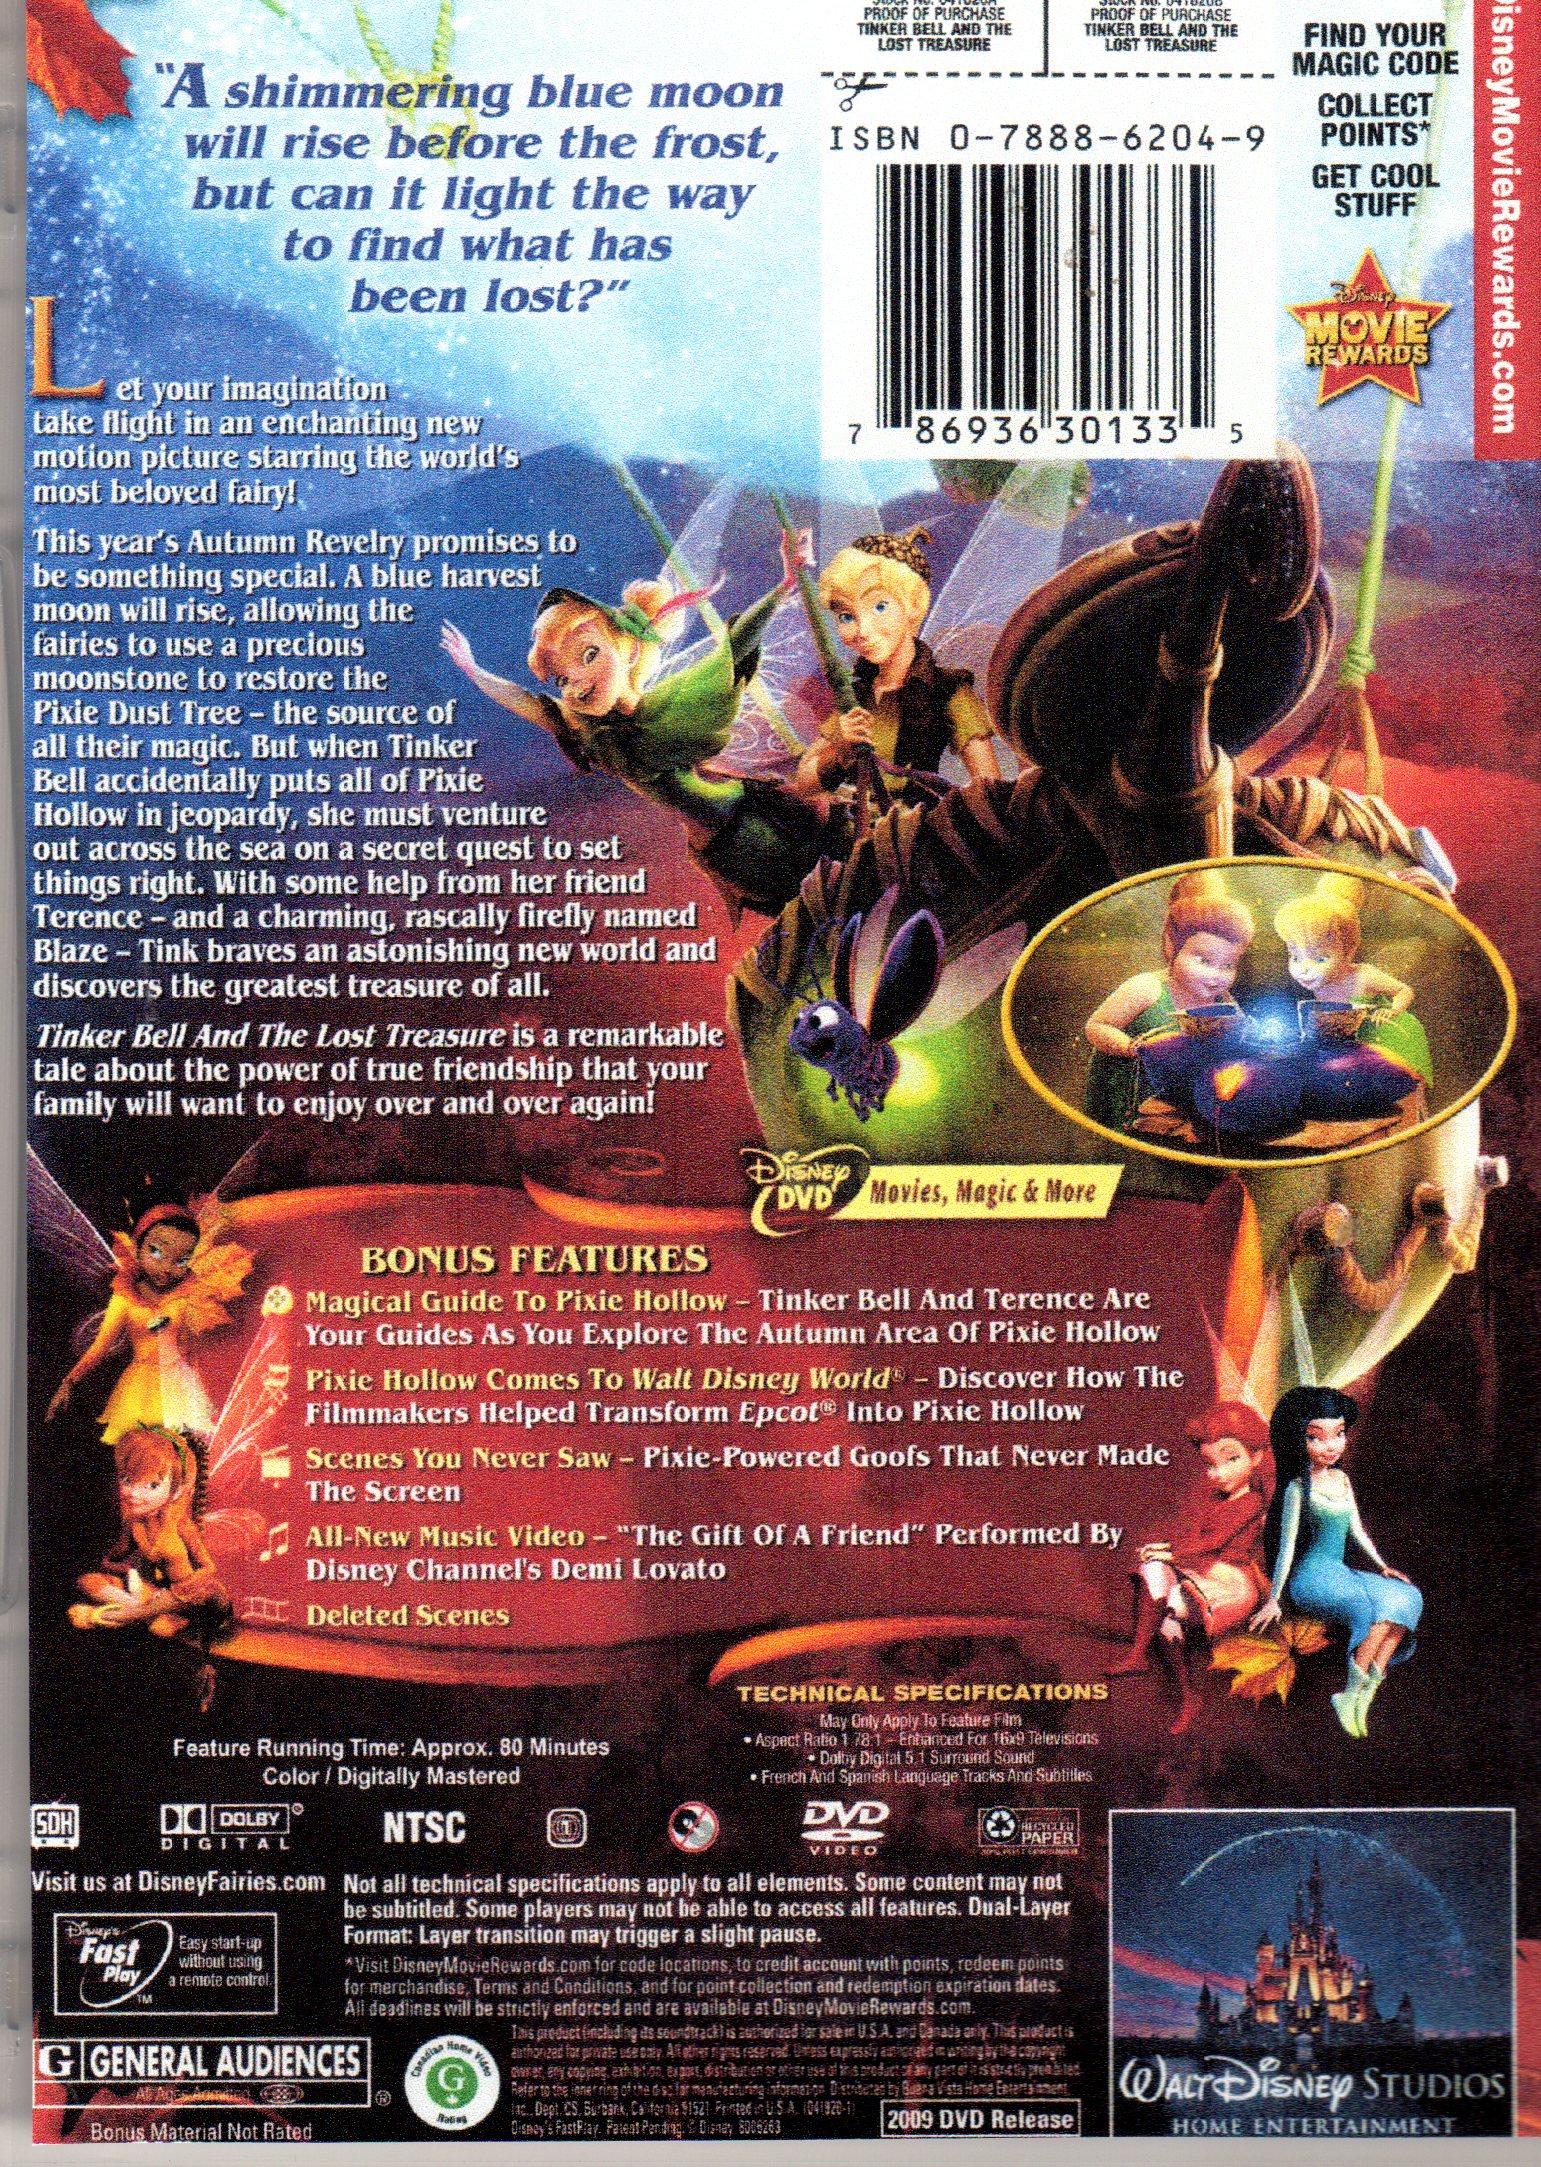 TINKER BELL AND THE LOST TREASURE” DVD: A Walt Disney animation. PRIVATE  COLLECTION. * 2 ITEMS MINIMUM FOR INTERNATIONAL ORDERS FROM USA. ONLY $  FEE PER ADDITIONAL ITEM SHIPPED. – Norberto Perdomo